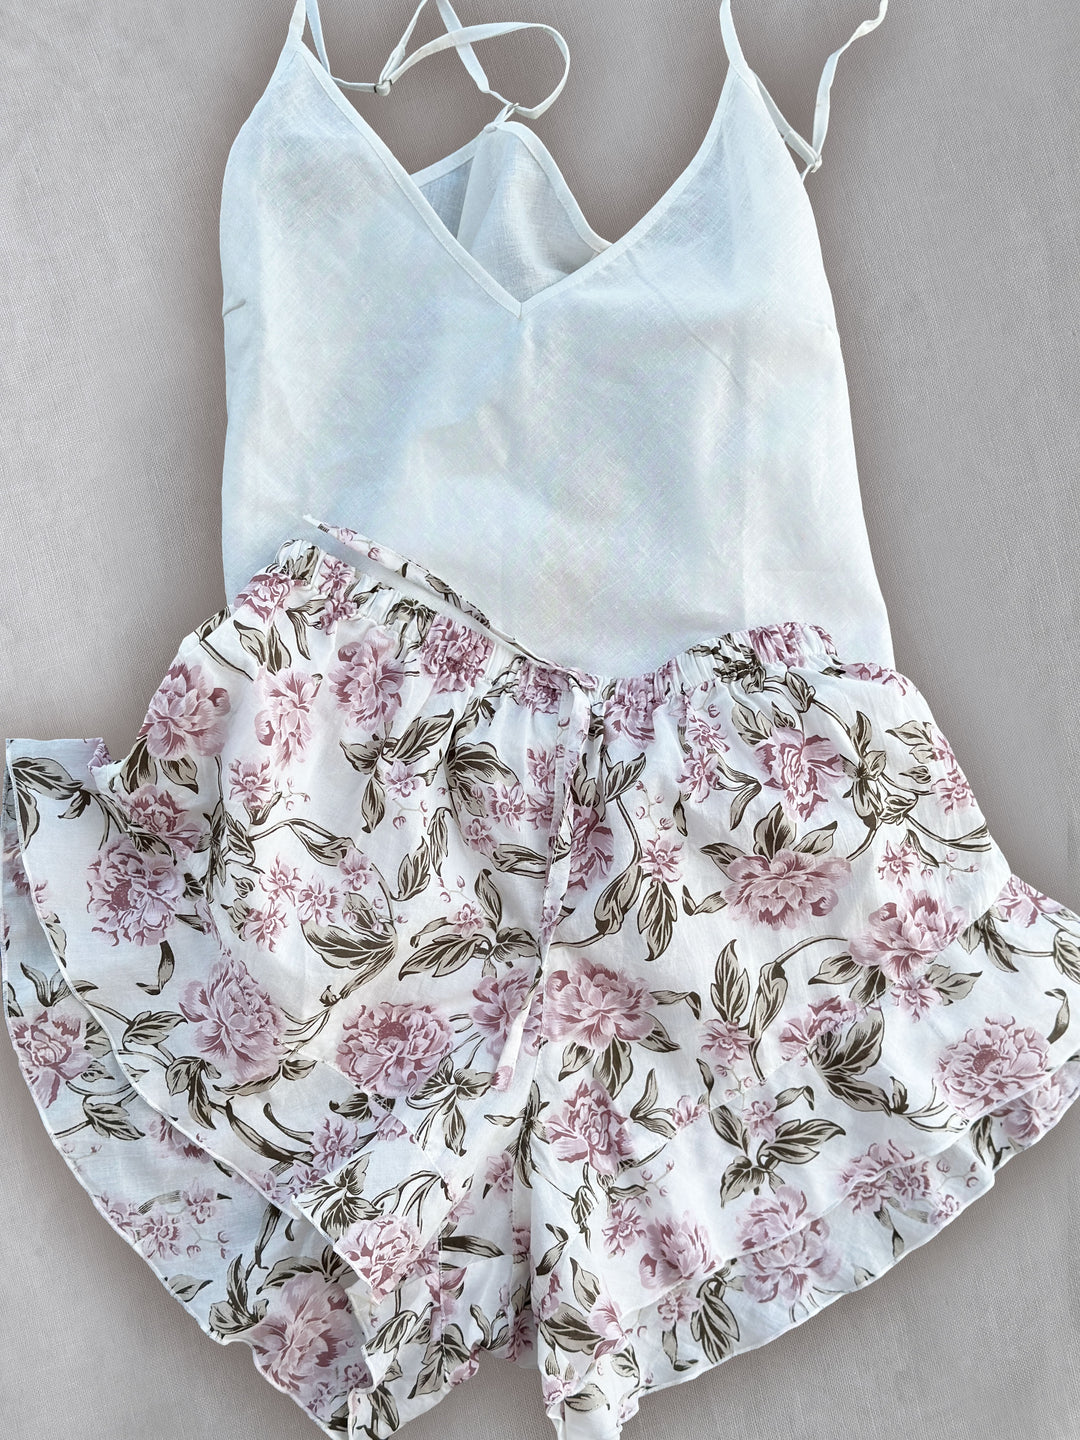 cami in white with floral shorts in organic cotton